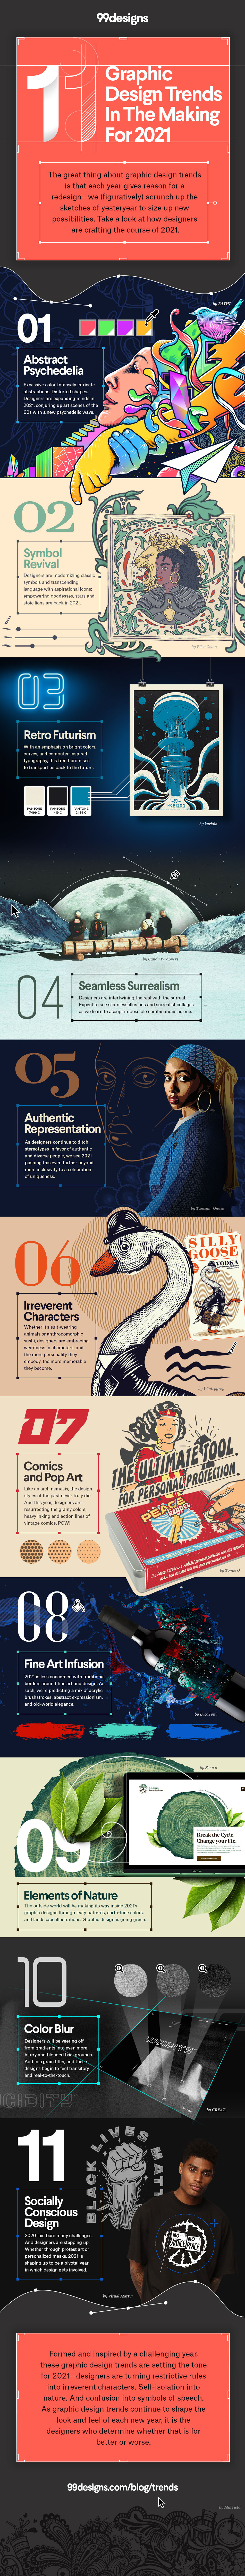 Top 11 Graphic Design Trends For 2021